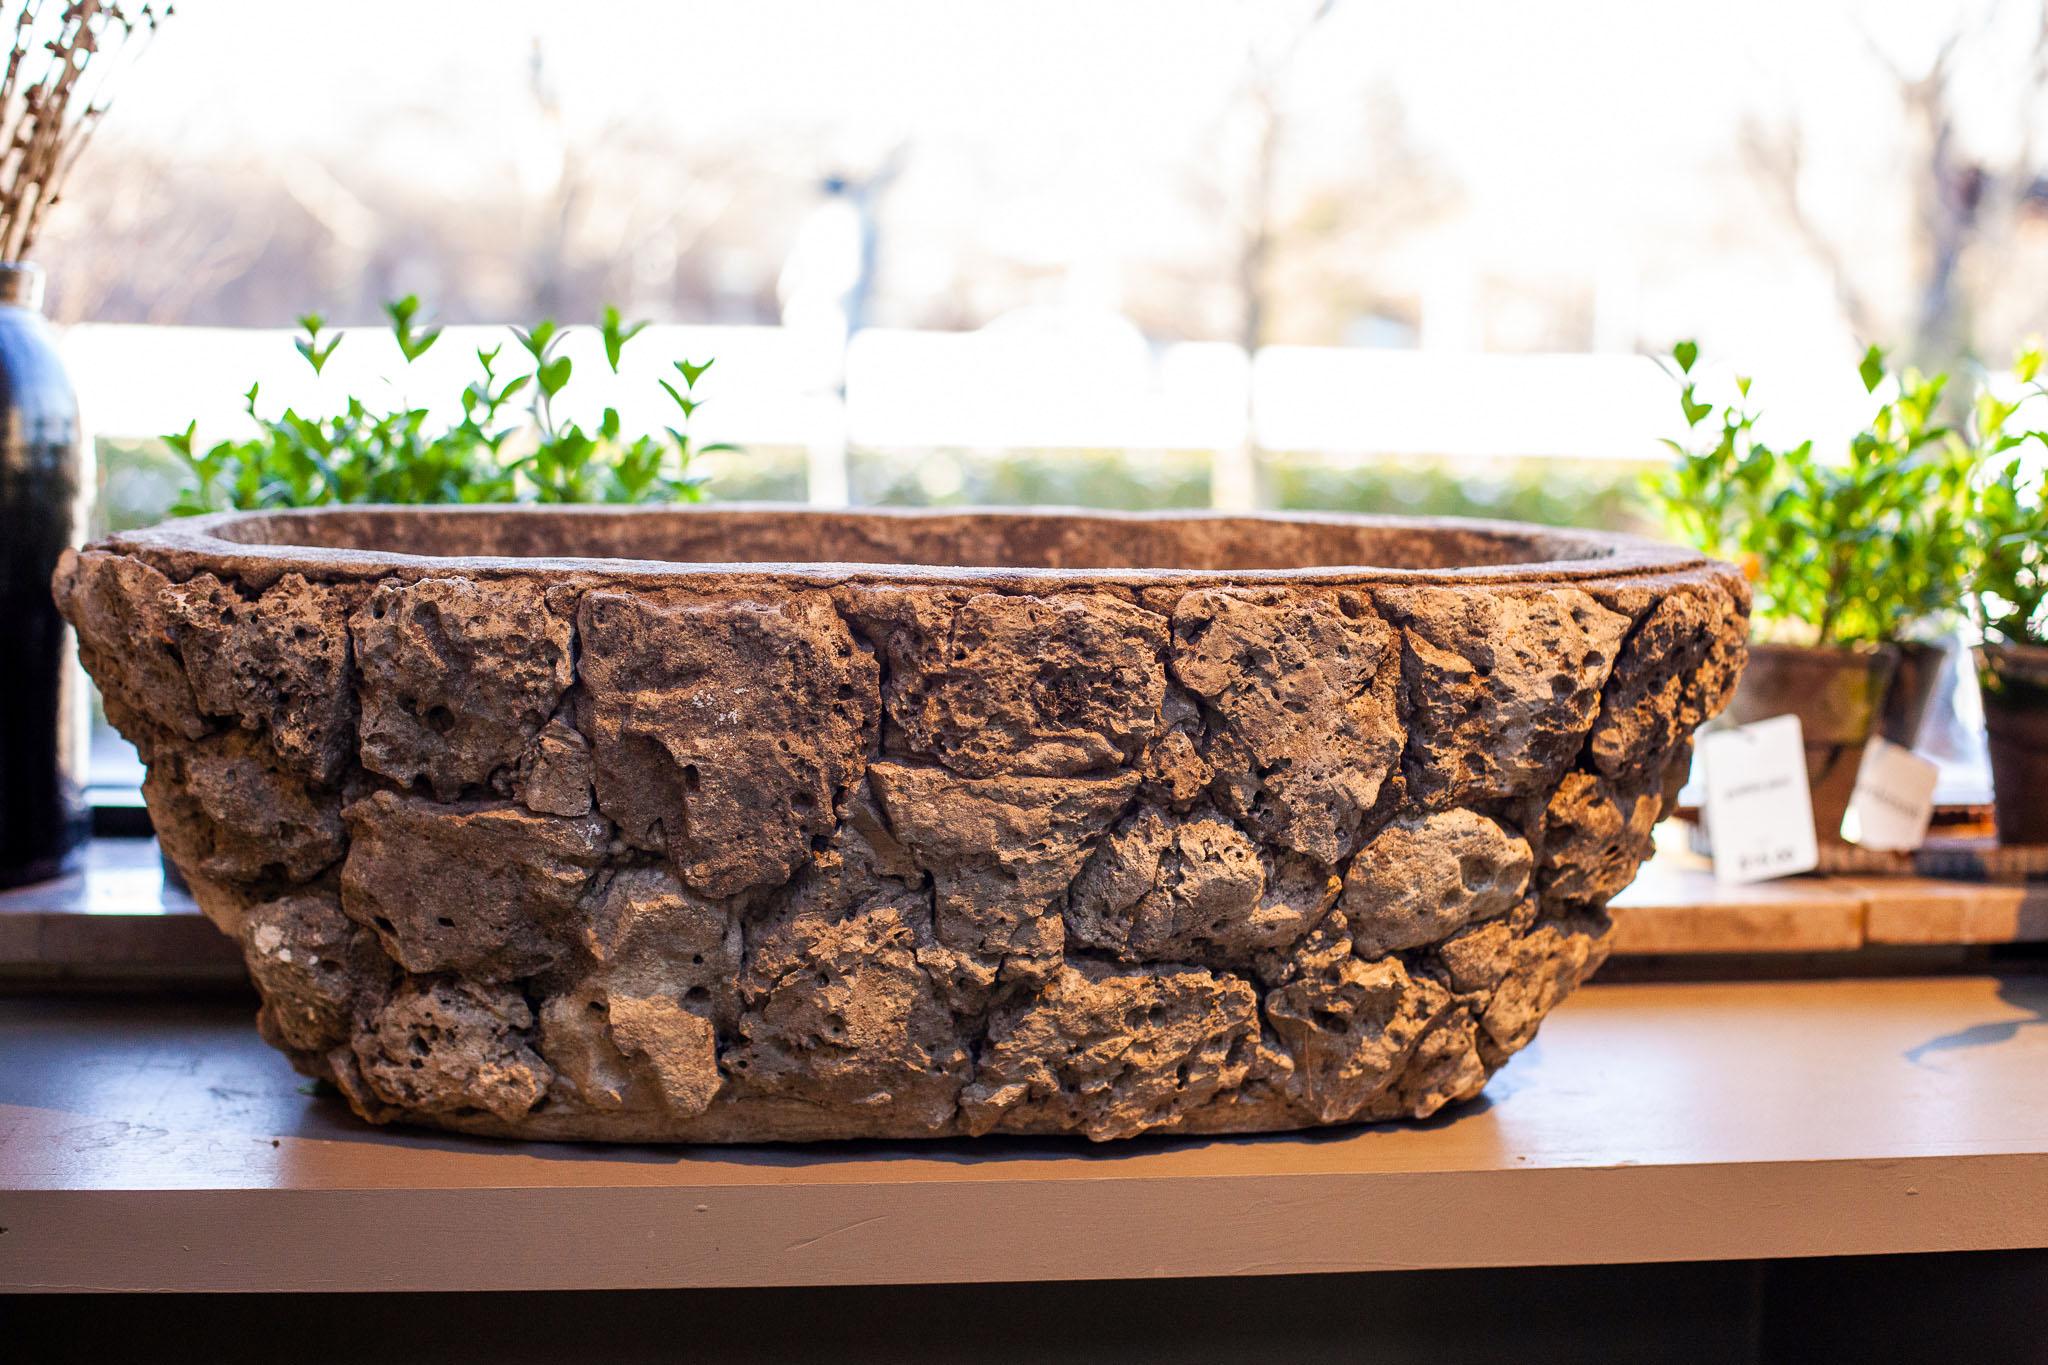 Fleurdetroit presents. for your consideration a pair of stone encrusted planters, reminiscent of the grotto at Versailles. 

A traveler through the twentieth century, this stone trough is sure to delight and add a sense of intrigue to any garden or